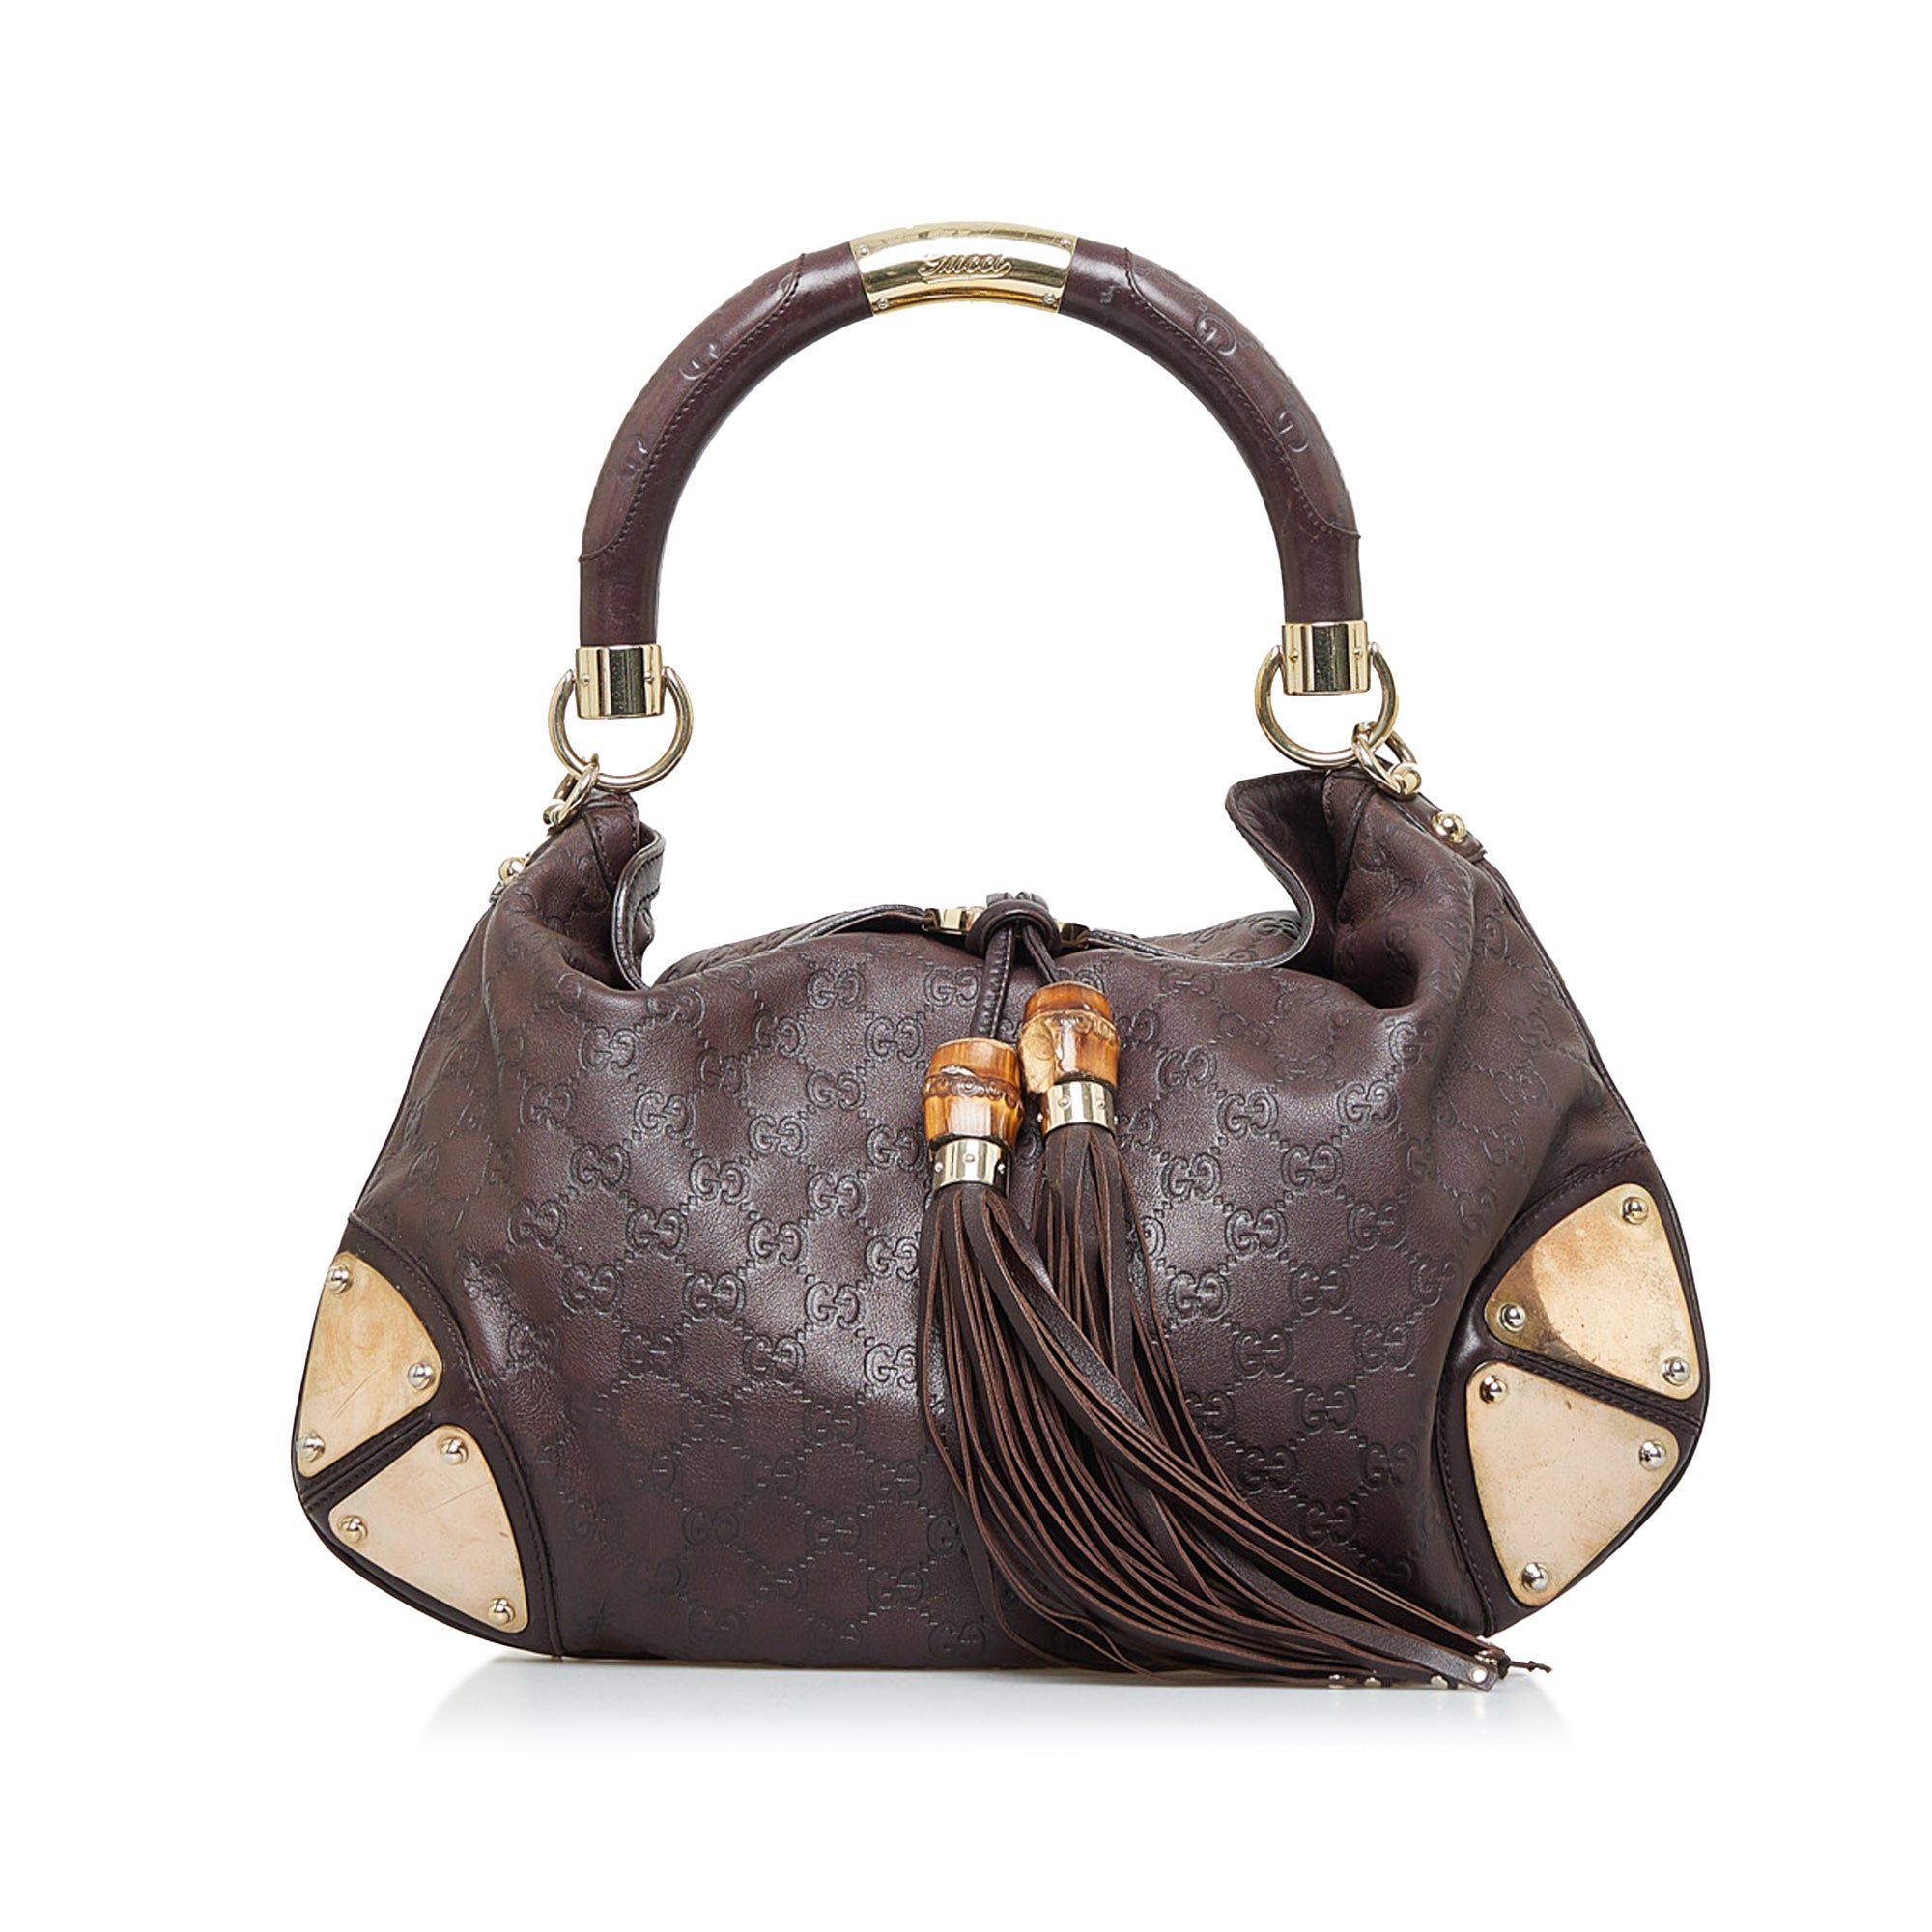 Gucci Guccissima Large GG Embossed Leather Hobo Bag